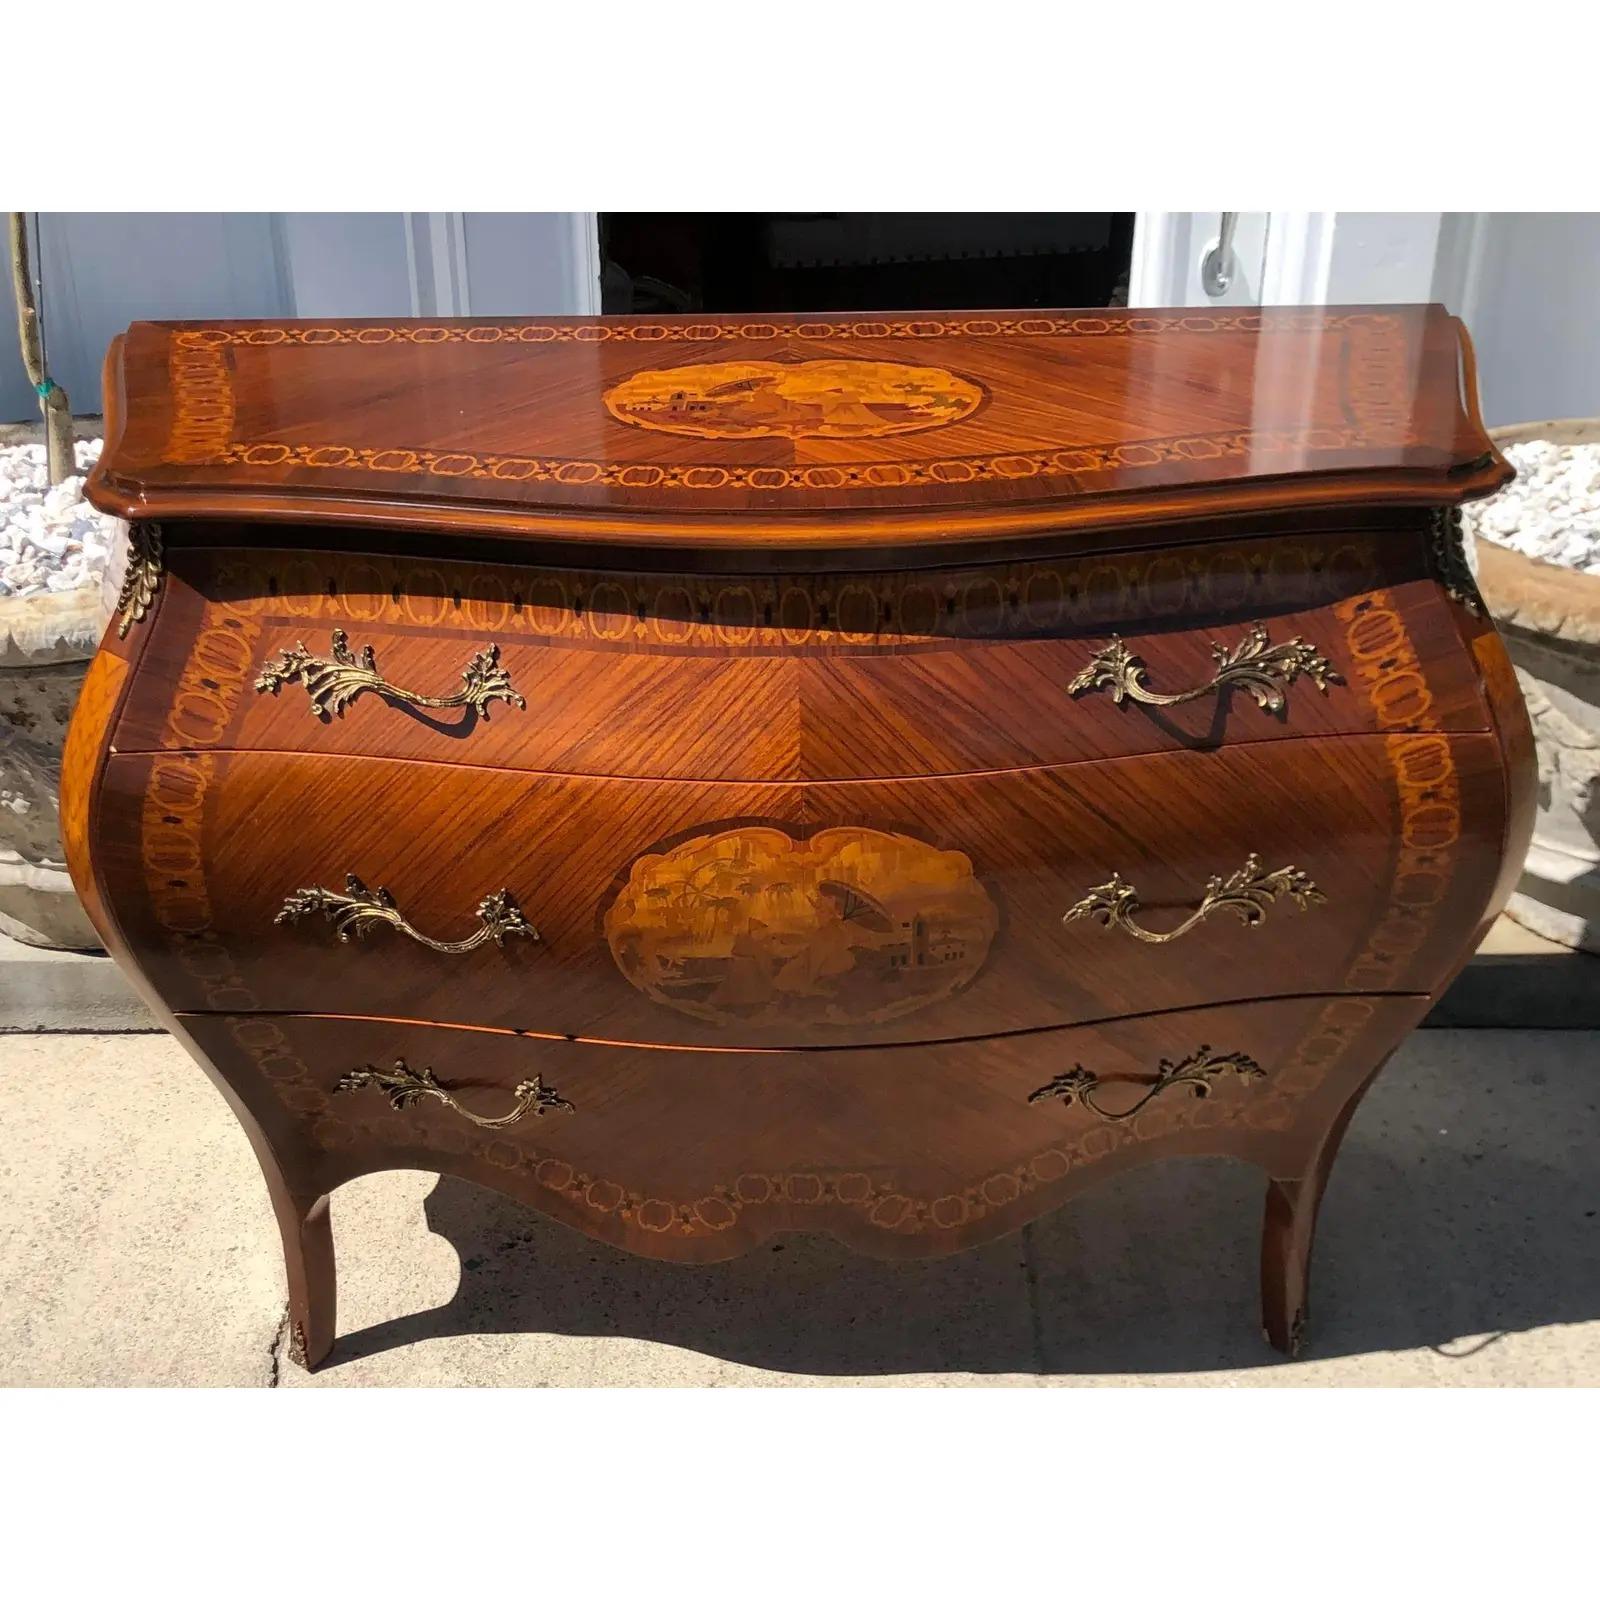 Giuseppe Maggiolini Style Inlaid Mahogany Bombay Commode by Charles & Charles. Made by Charles & Charles in the manner of Giuseppe Maggiolini. It is an outstanding example with amazing inlaid decoration on the front as well as the top including a